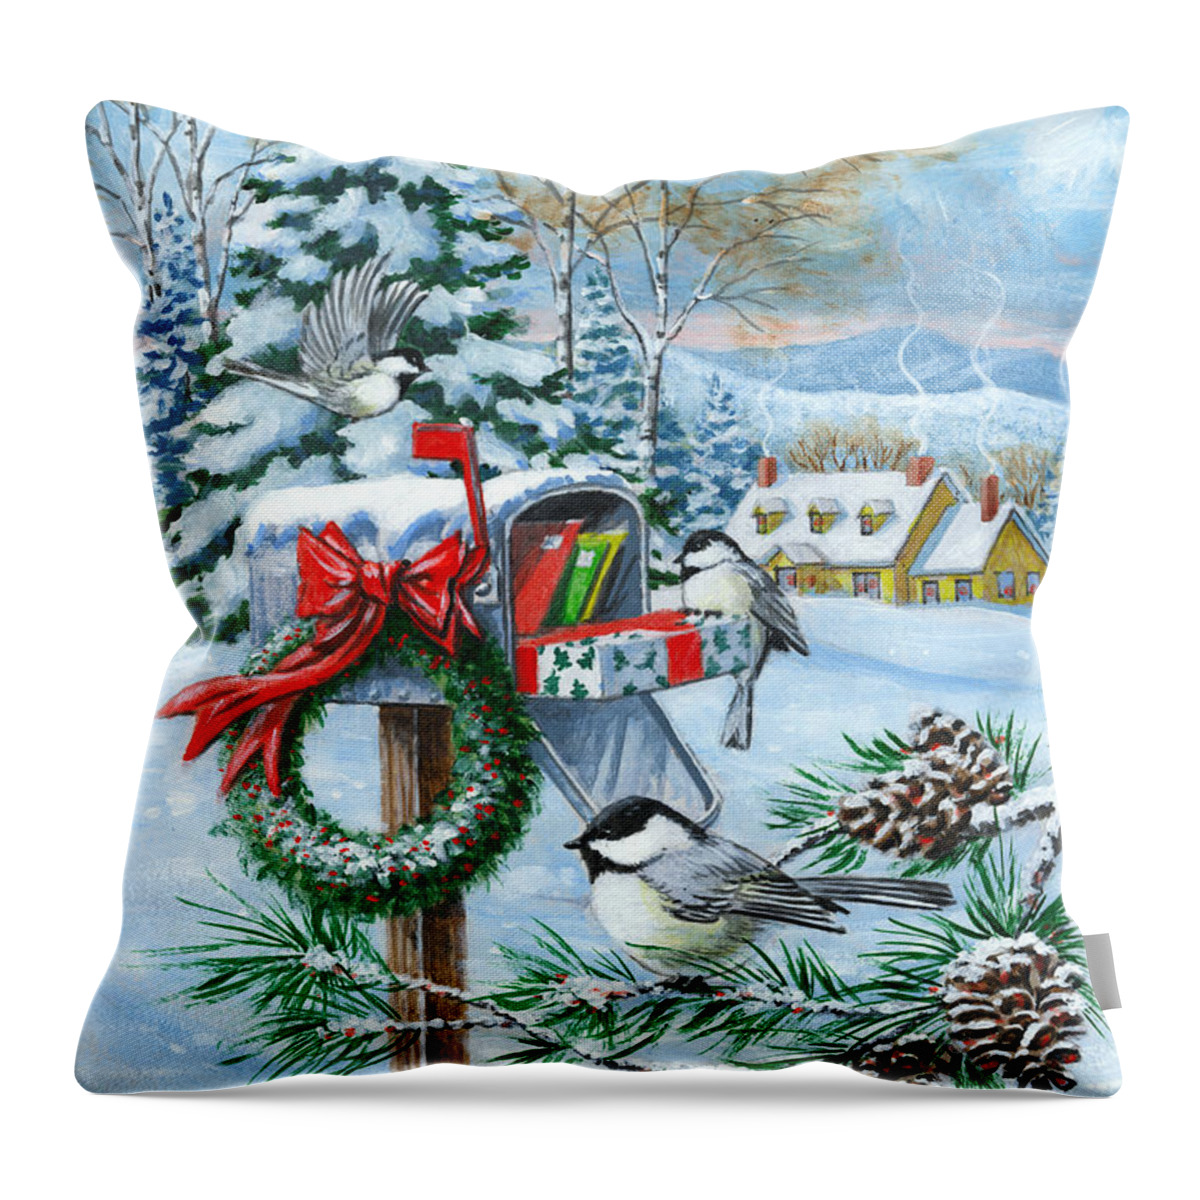 Mail Throw Pillow featuring the painting Christmas Mail by Richard De Wolfe